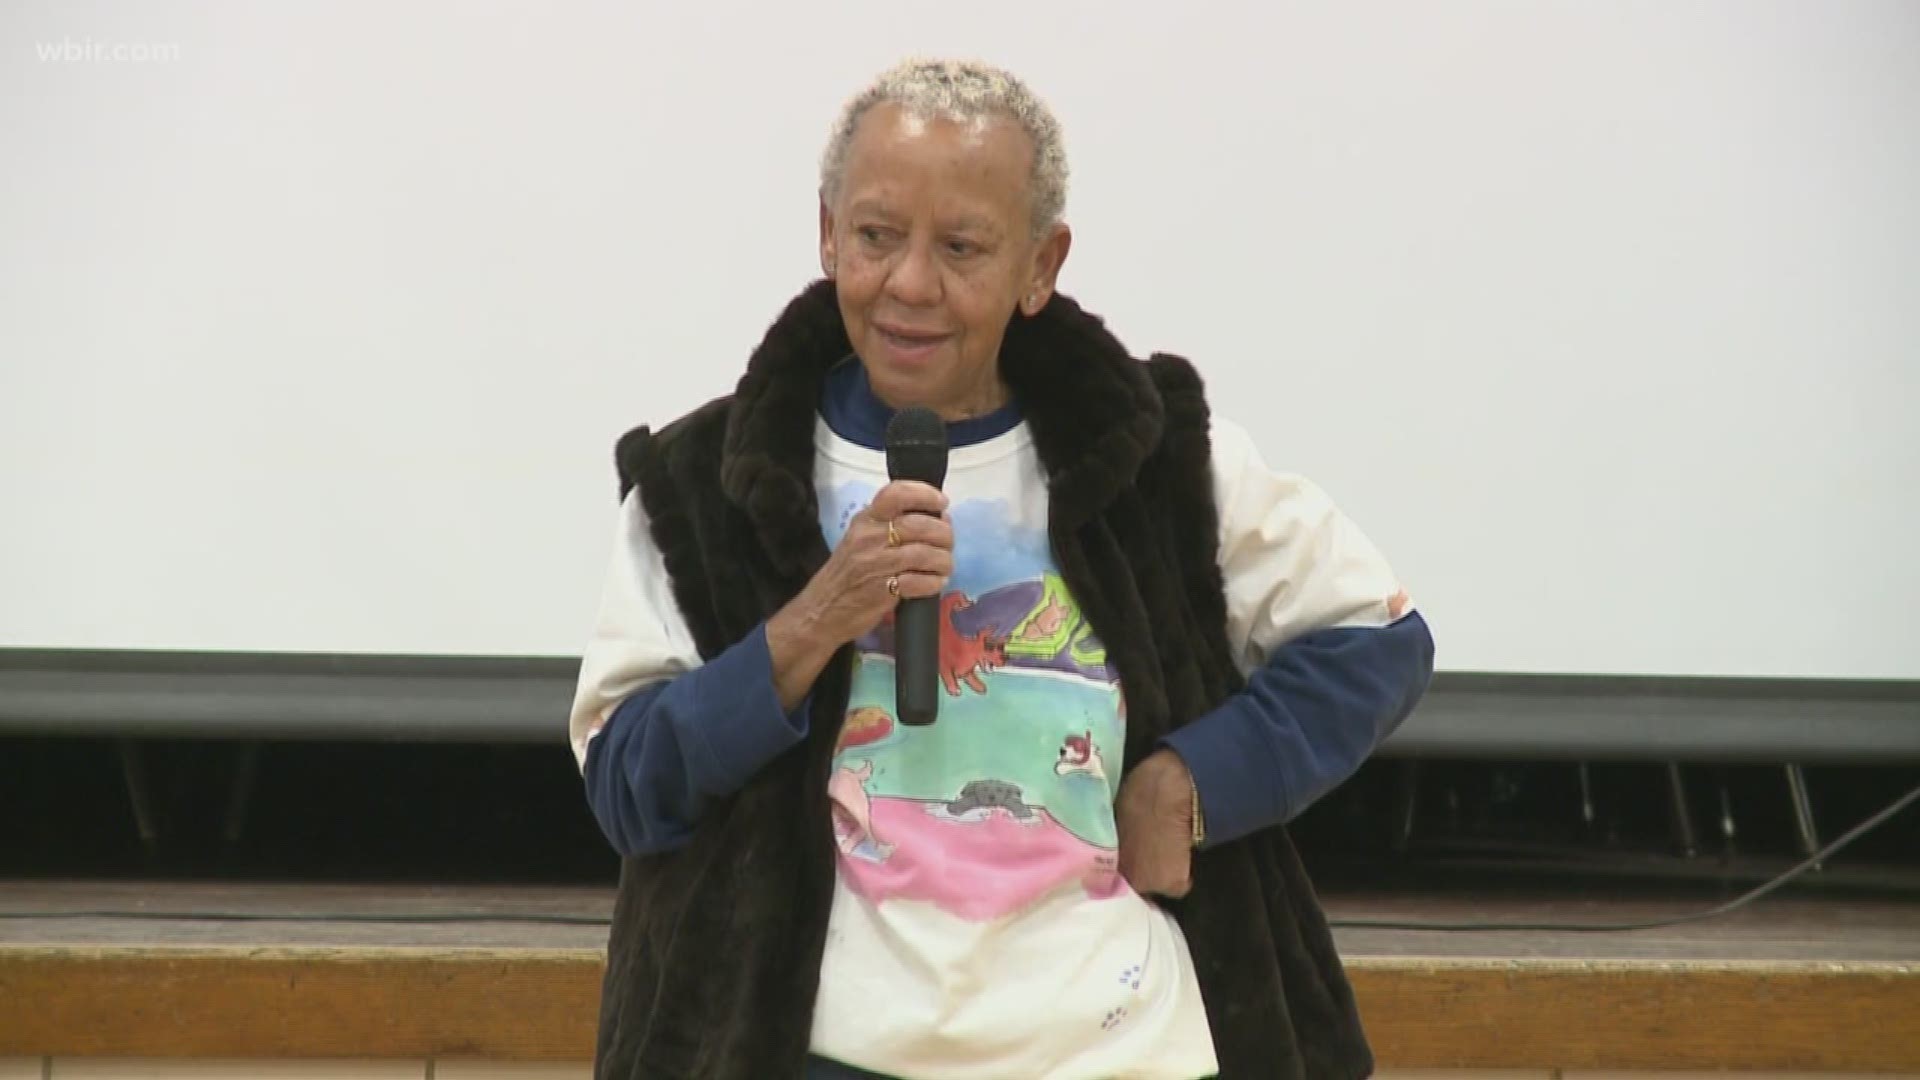 Nikki Giovanni is a Knoxville native, a graduate of the Knox County School System, and went on to publish more than 30 books in poetry as well as becoming a civil rights activist.